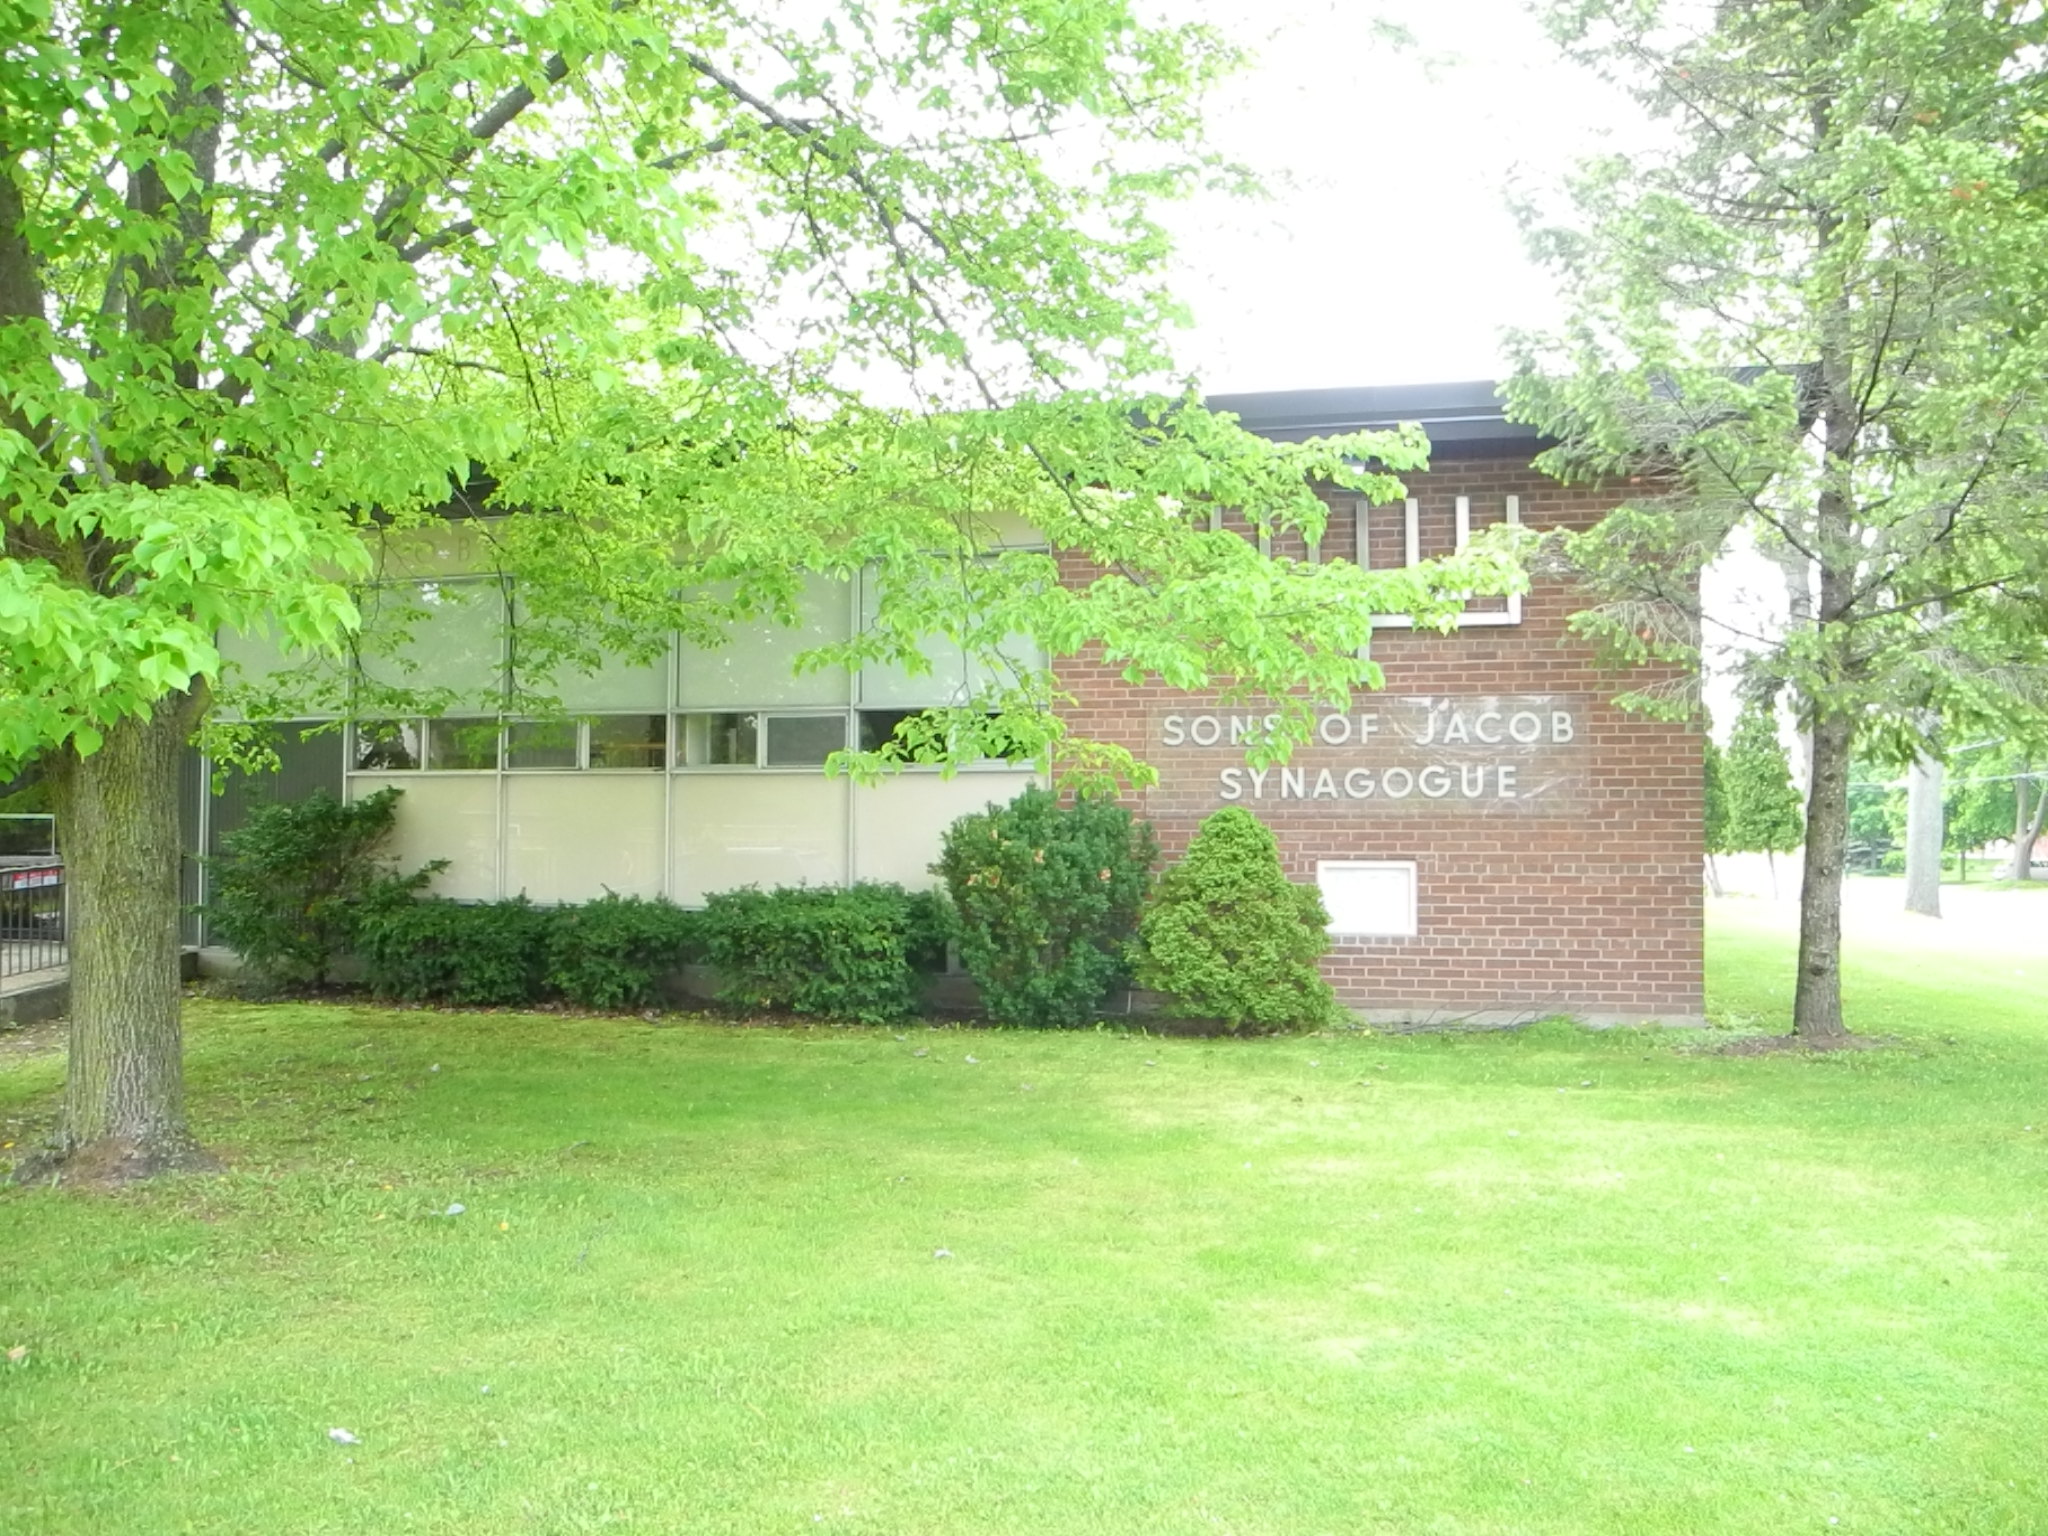 The Sons of Jacob Synagogue is located on Victoria Street in Belleville.